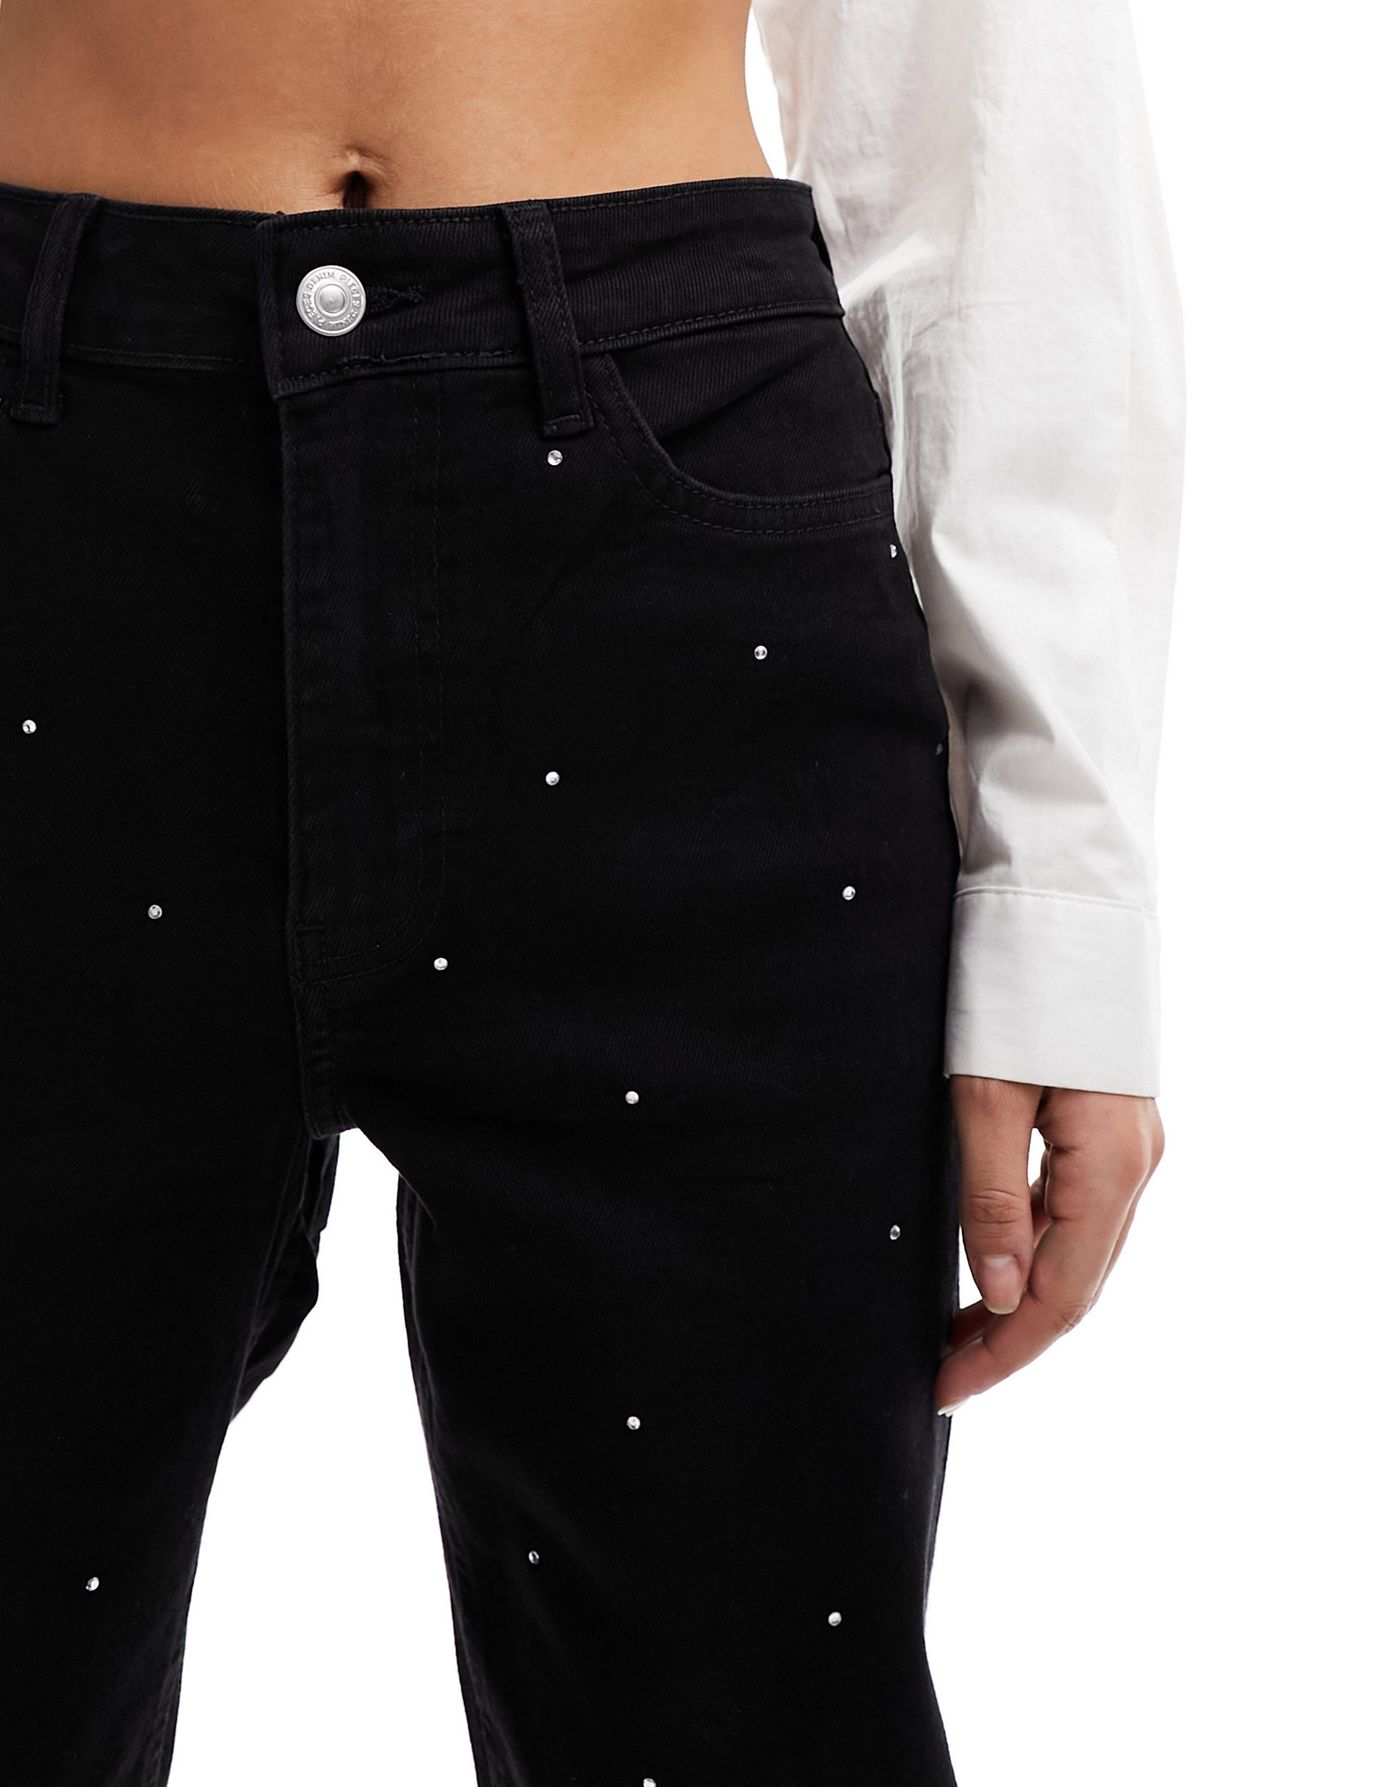 Pieces rhinestone wide leg jeans in washed black